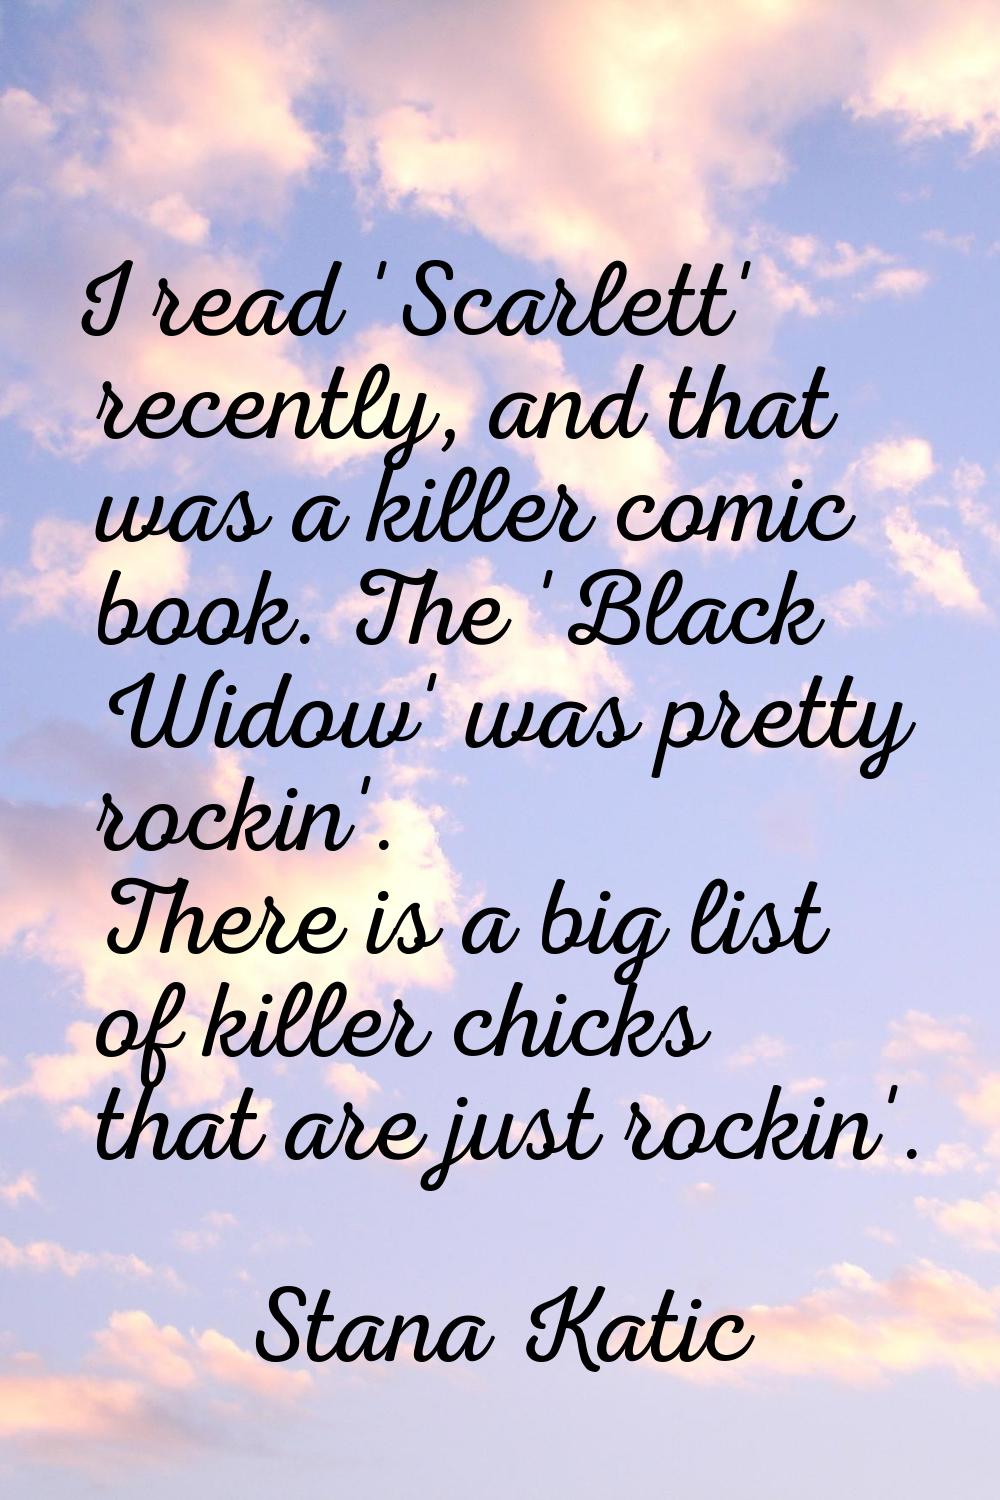 I read 'Scarlett' recently, and that was a killer comic book. The 'Black Widow' was pretty rockin'.